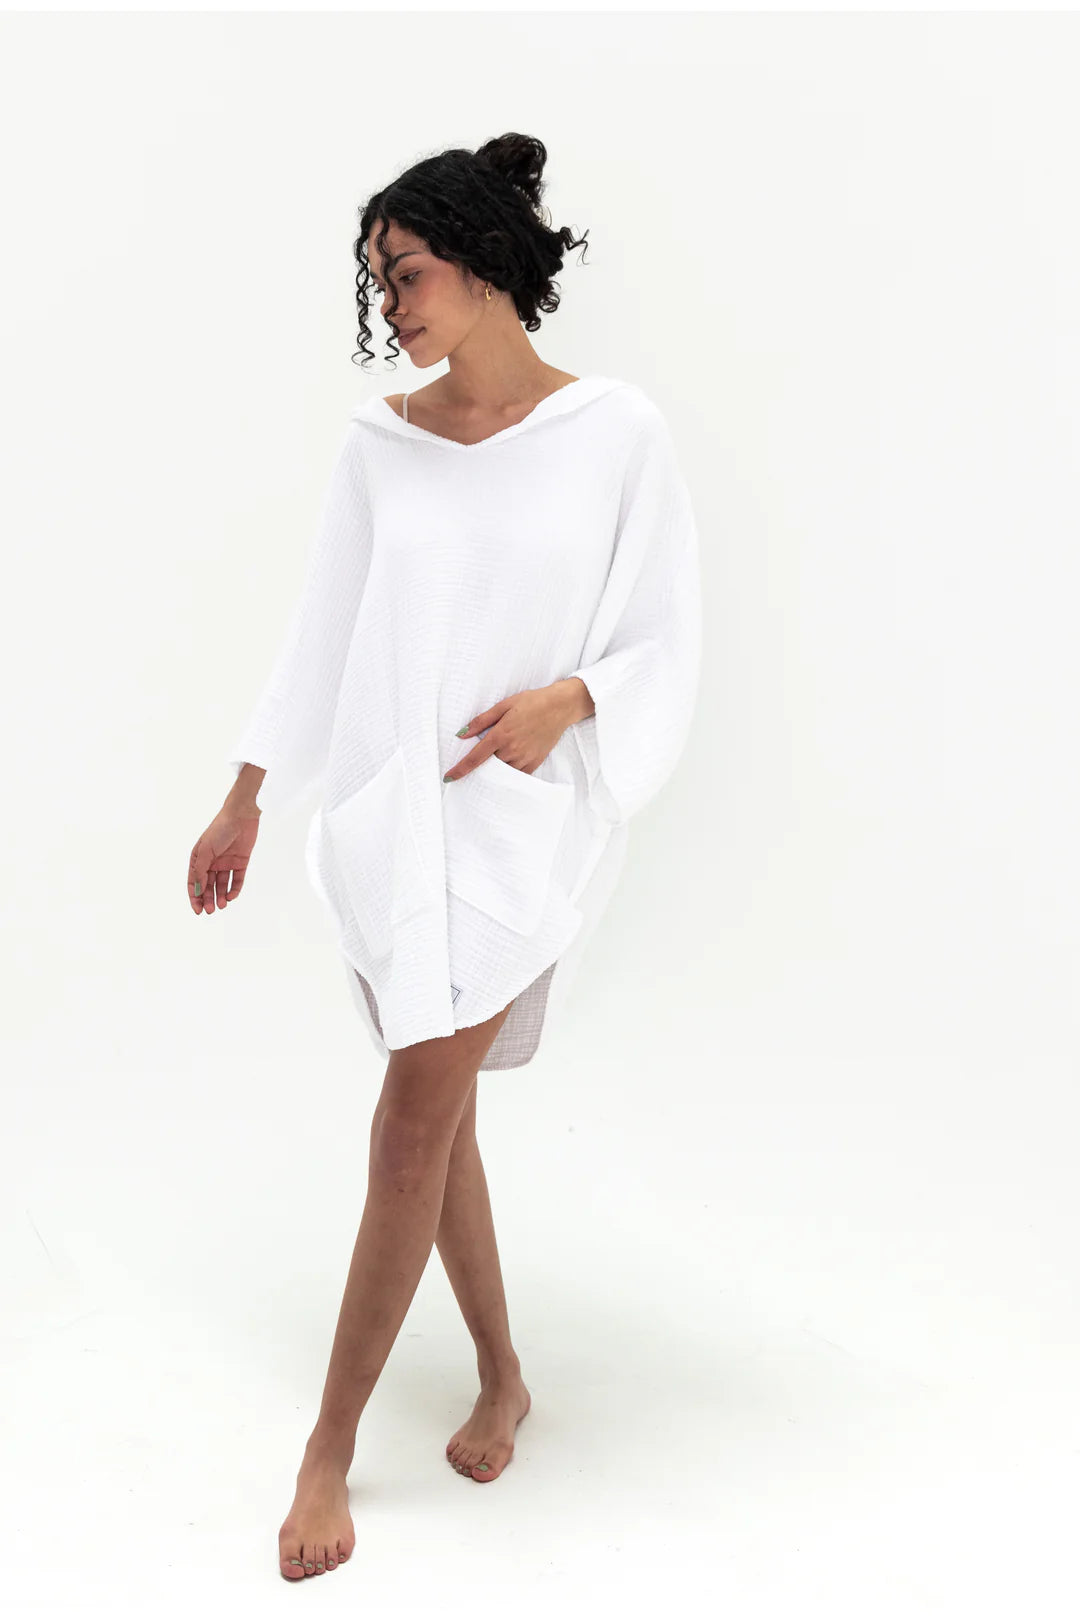 The Cocoon Surf Poncho in Seashell